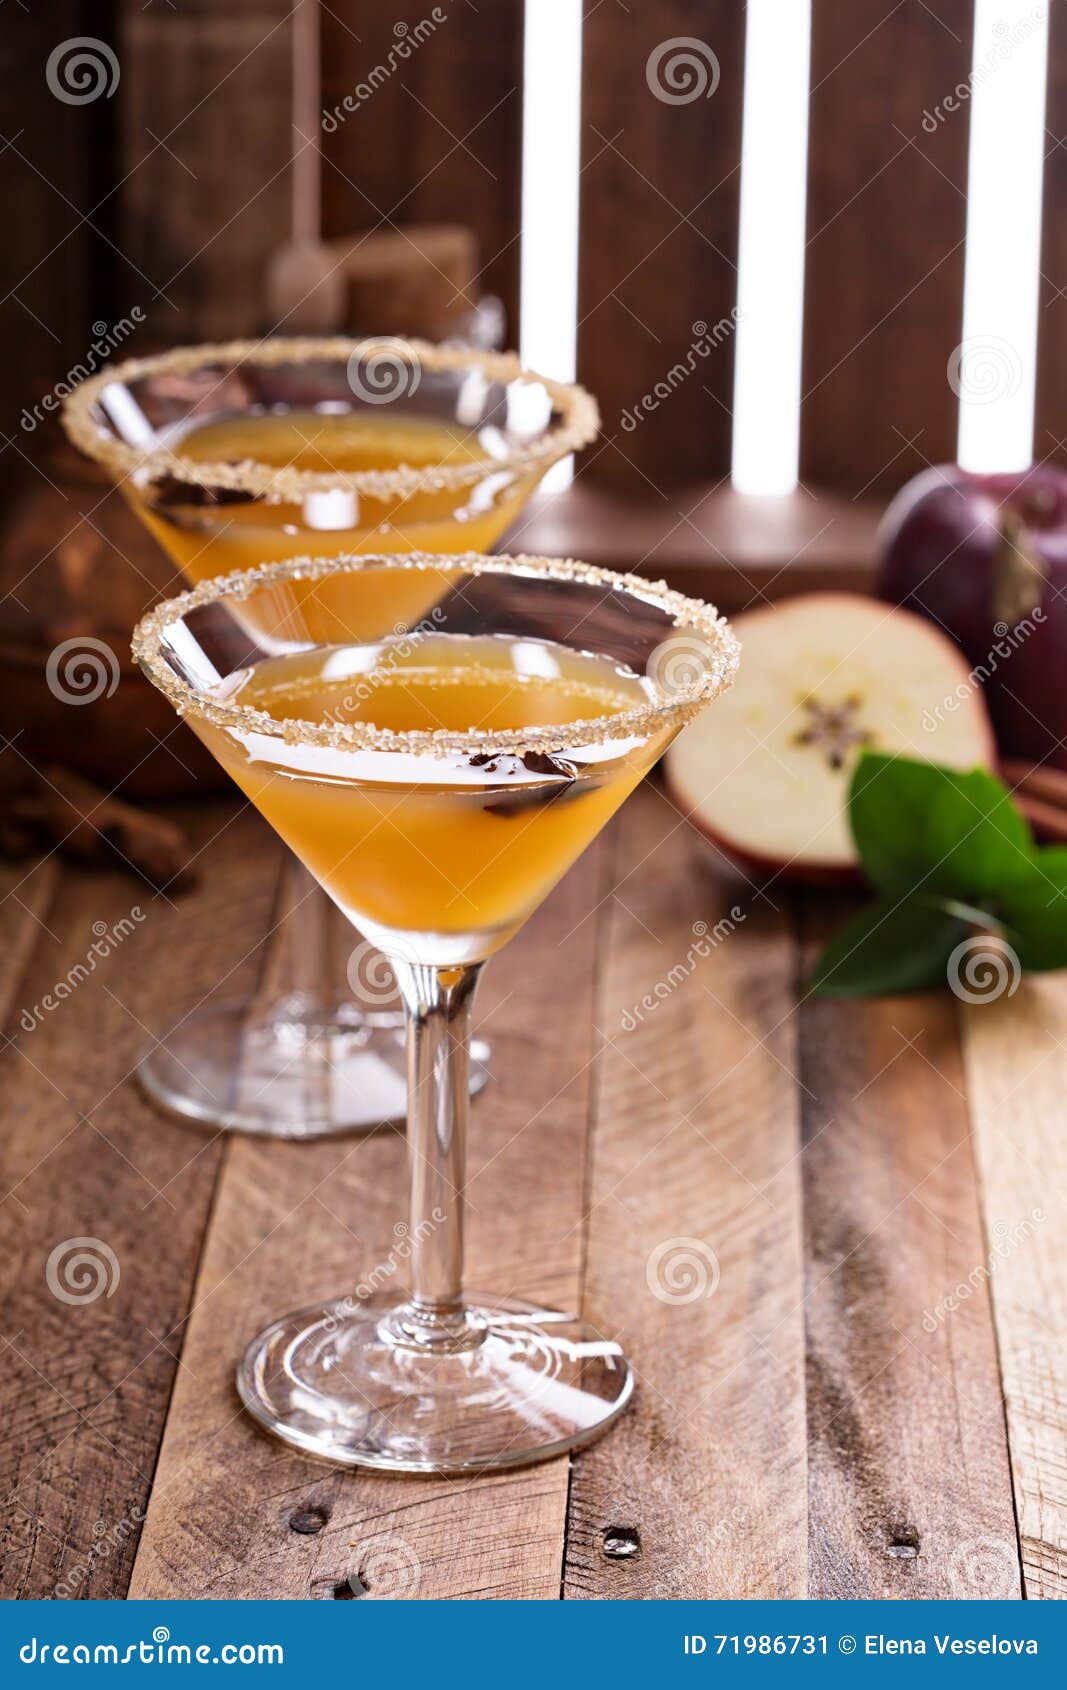 Apple Cider Martini with Star Anise Stock Image - Image of bright, club ...